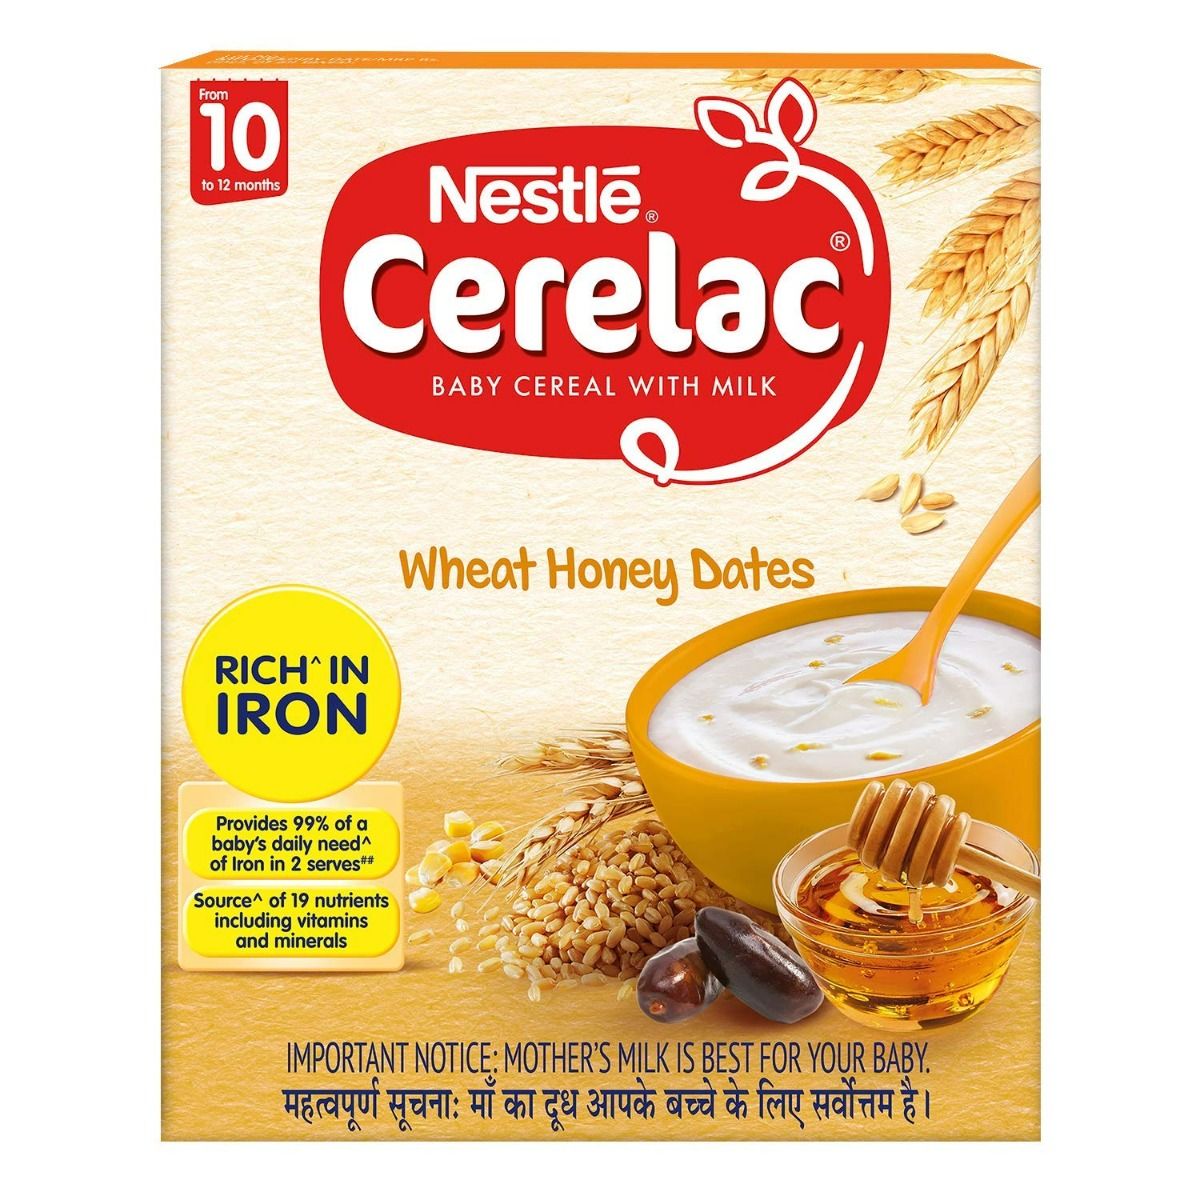 Buy Nestle Cerelac Baby Cereal with Milk Wheat Honey Dates (From 10 to 12 Months) Powder, 300 gm Refill Pack Online